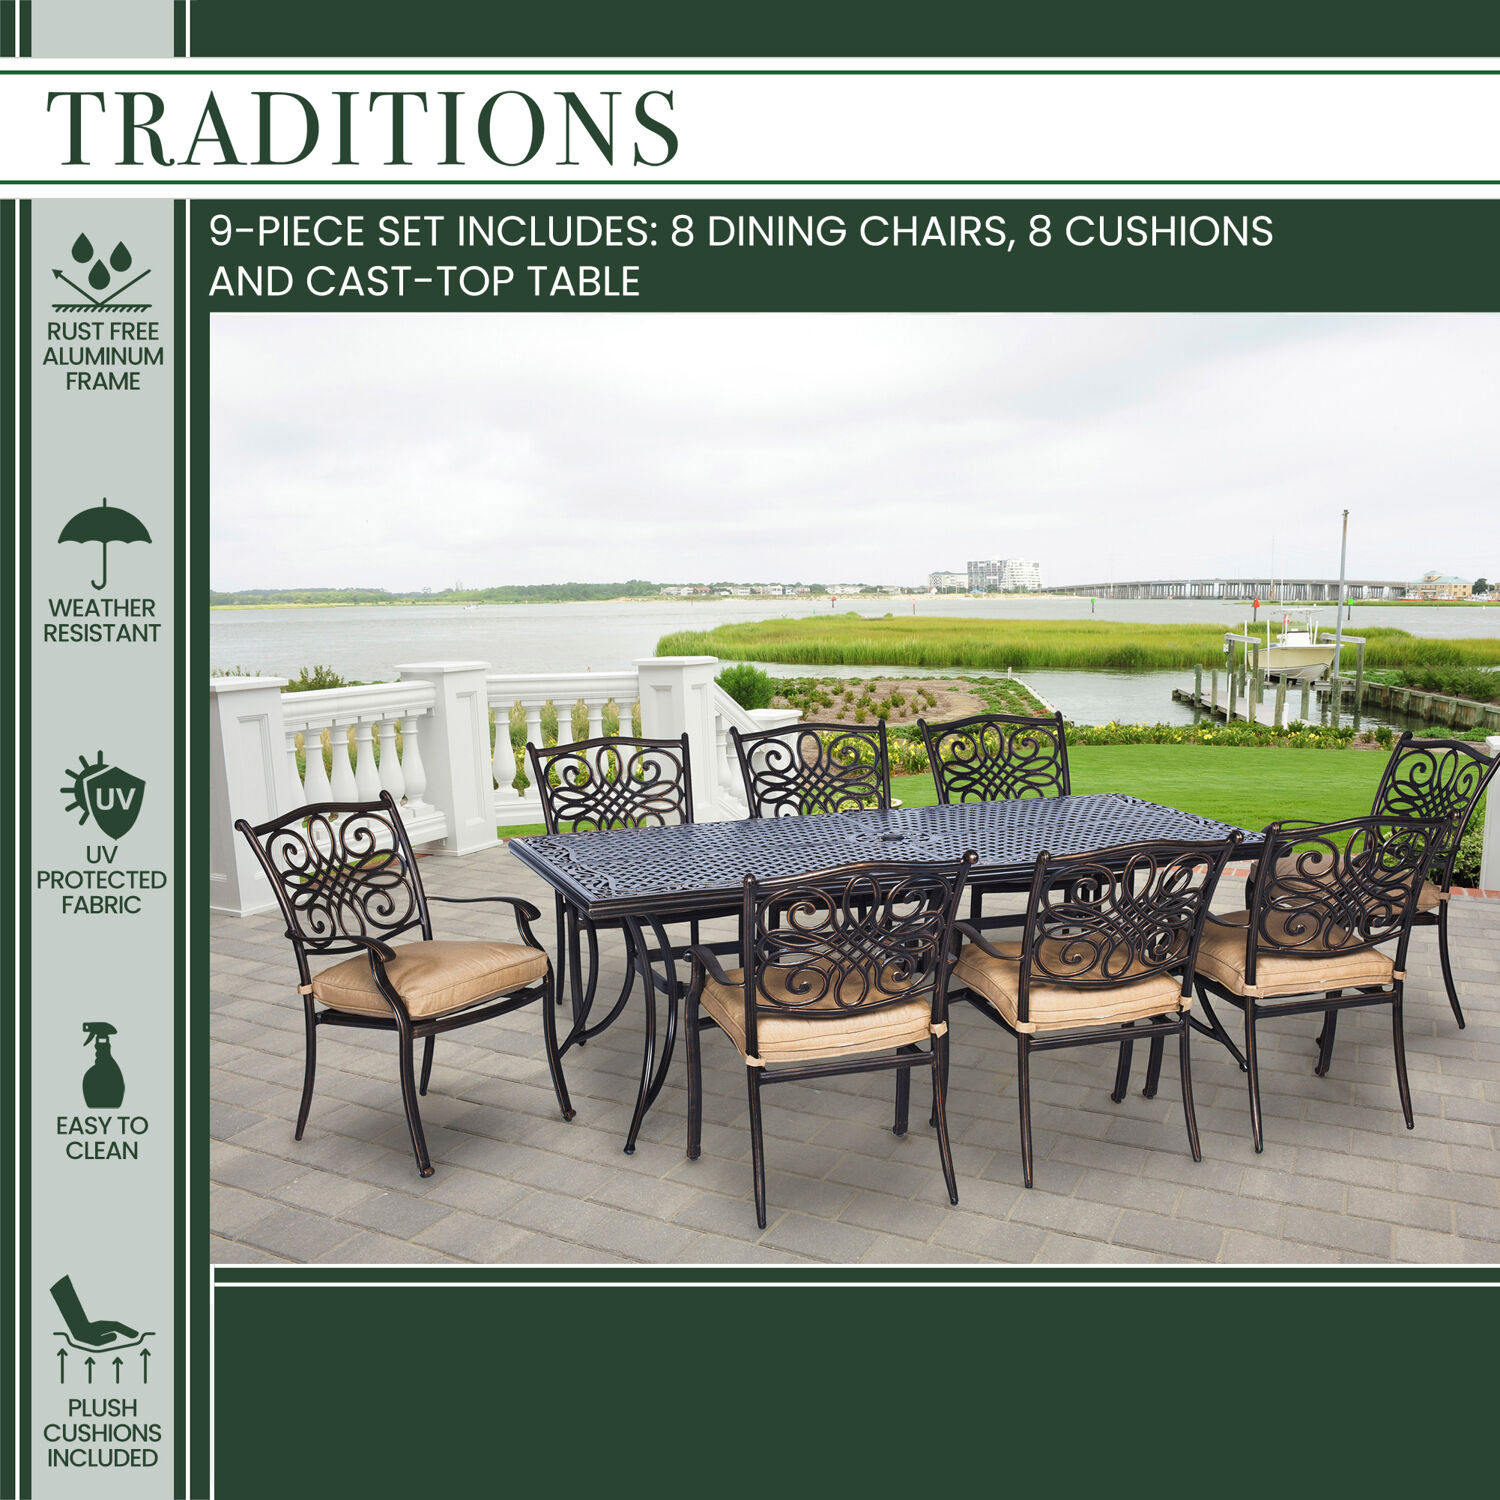 Hanover Traditions 9-Piece Aluminum Outdoor Dining Set, Natural Oat - image 16 of 17